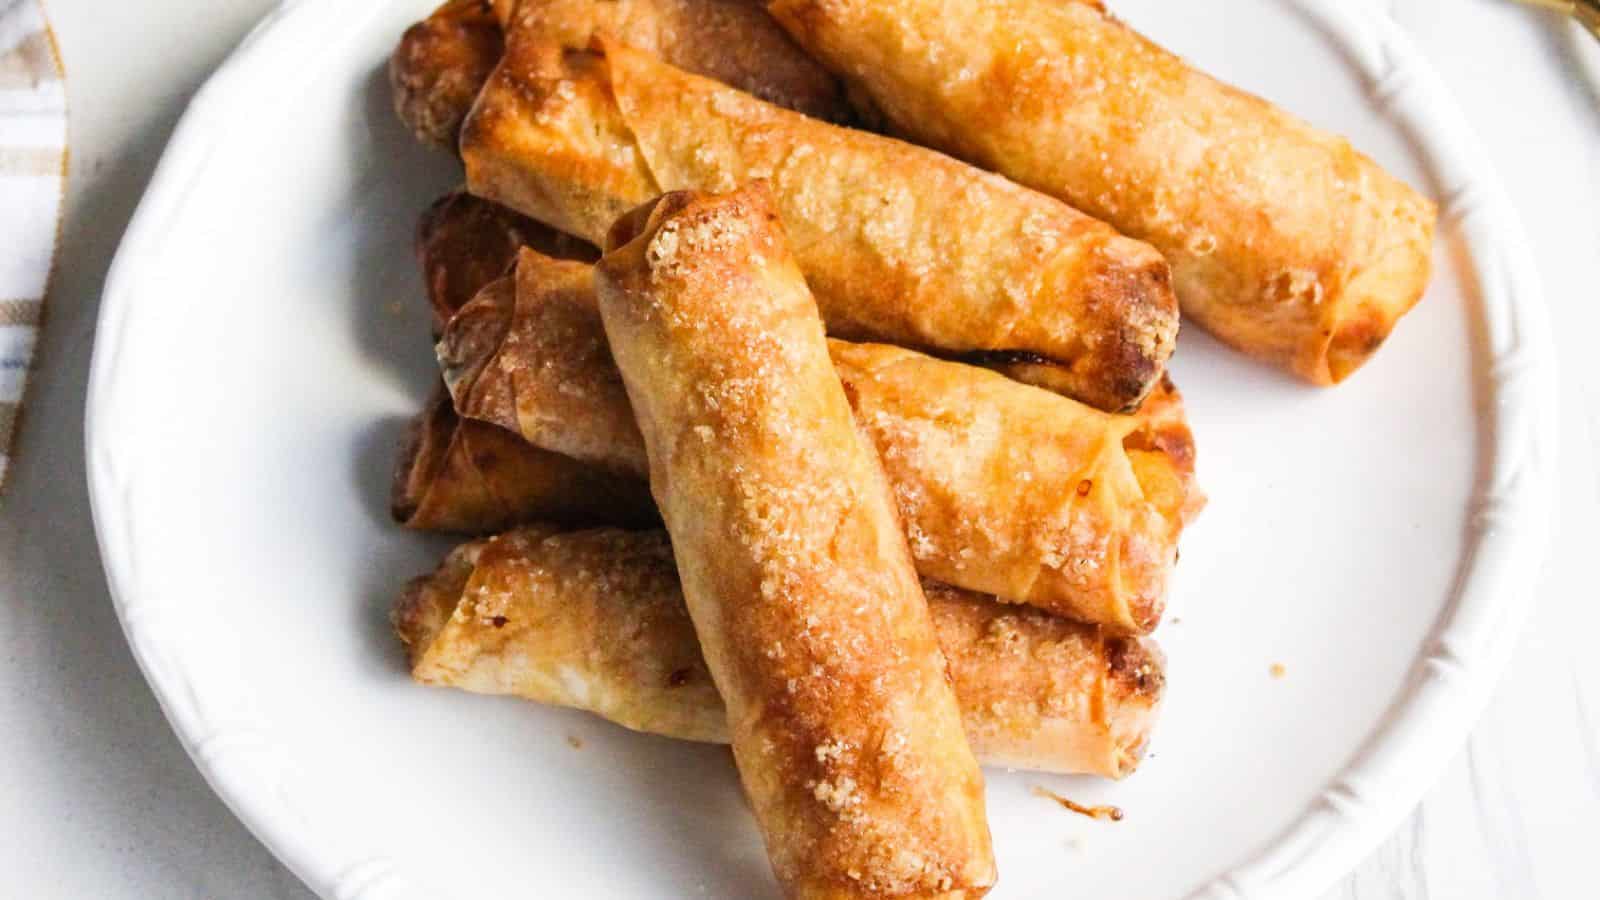 A plate of freshly cooked Filipino banana turon lumpia spring rolls.